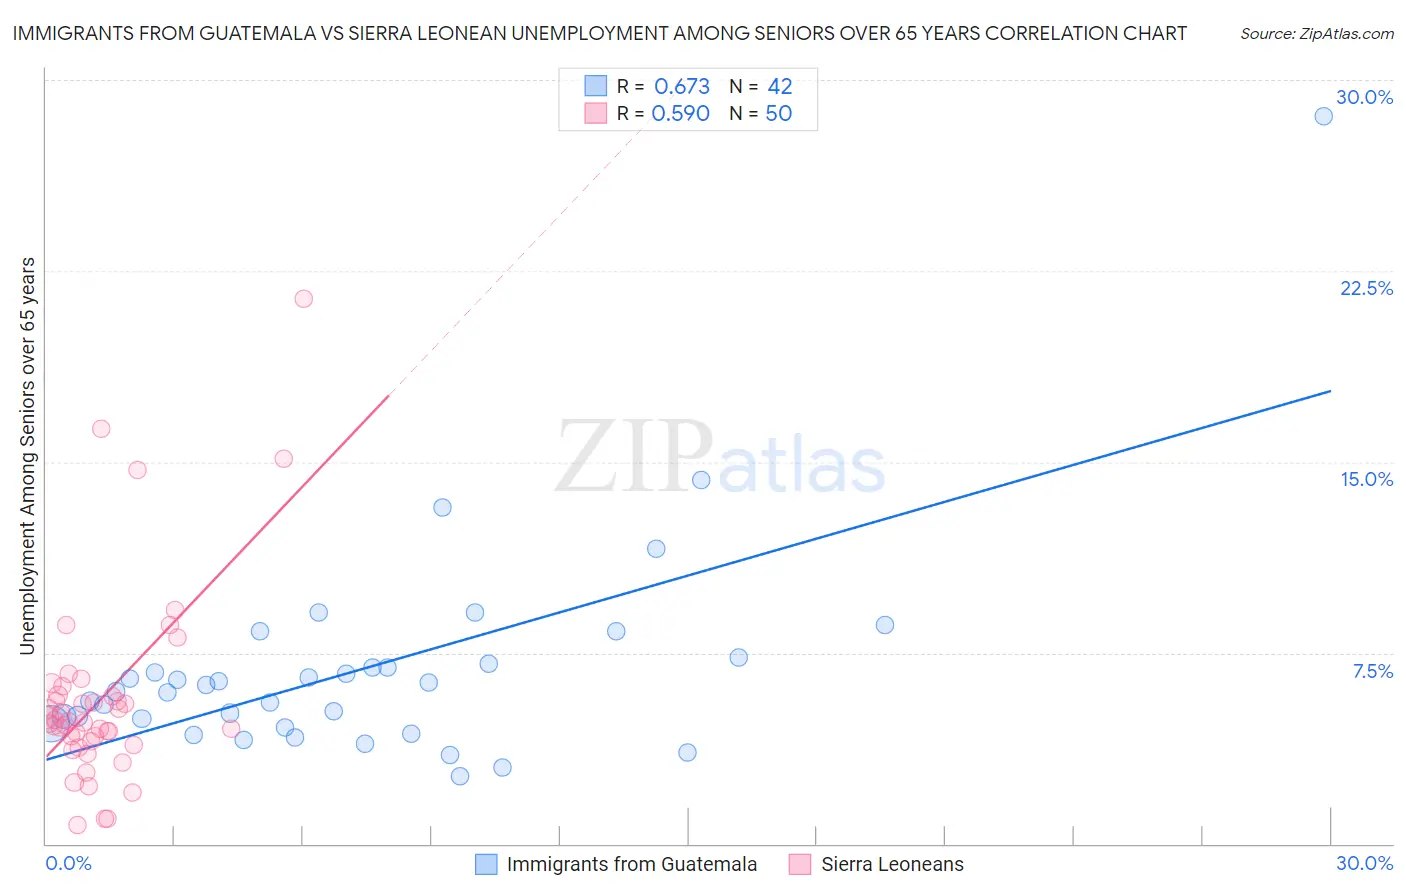 Immigrants from Guatemala vs Sierra Leonean Unemployment Among Seniors over 65 years